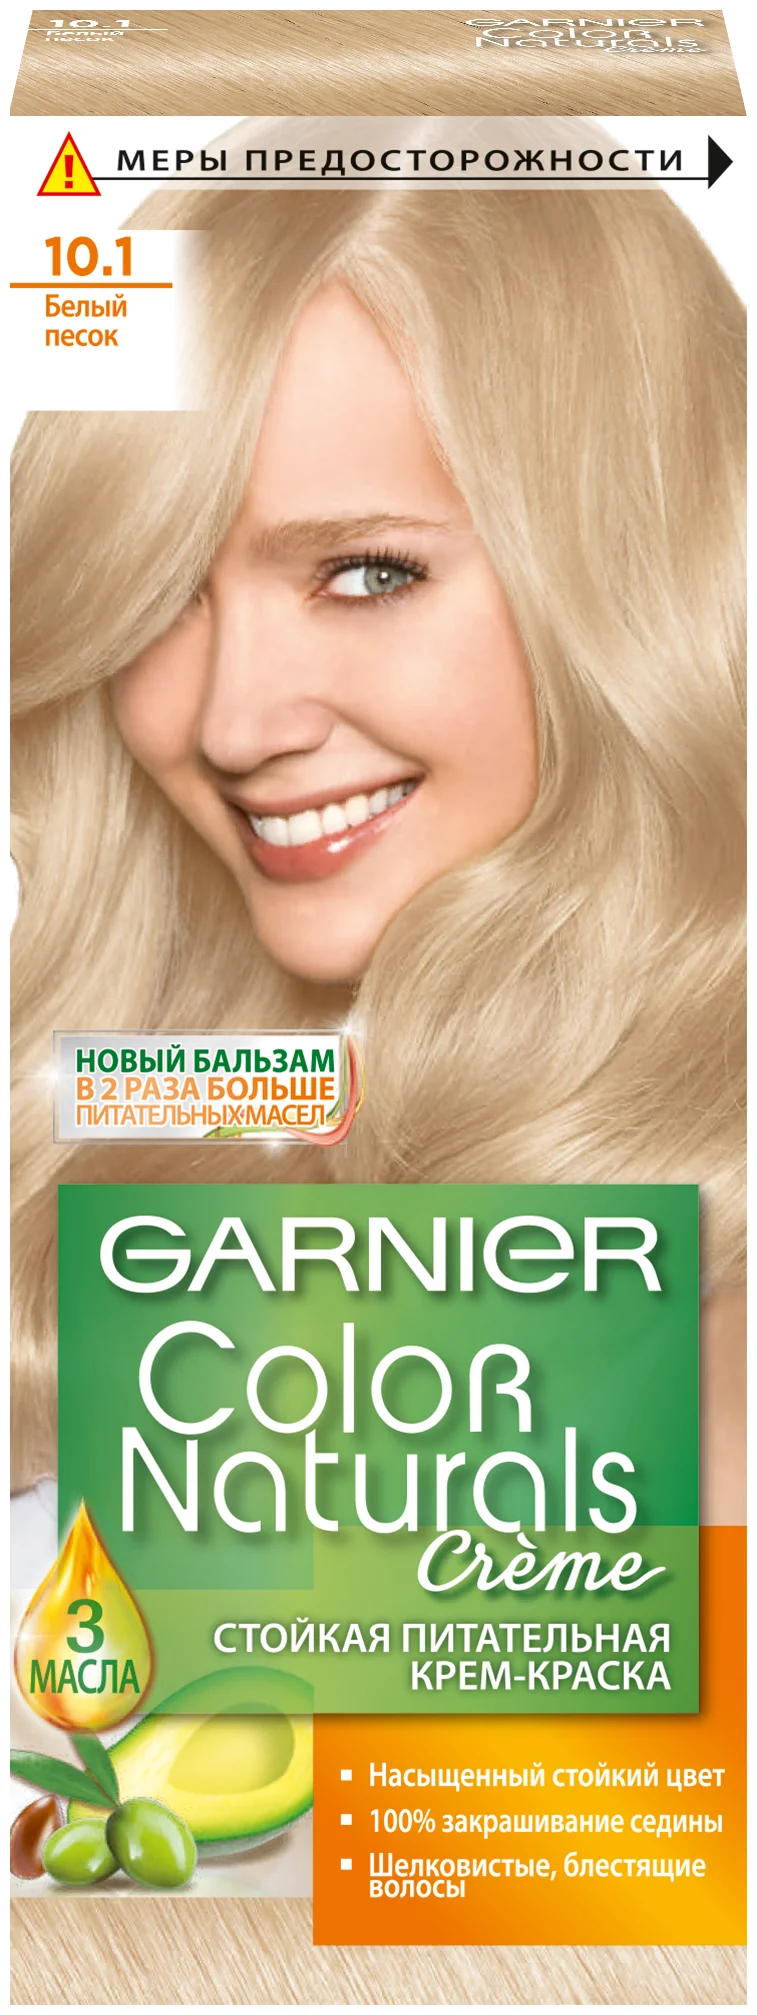 GARNIER "Color Naturals" - масла и экстракты: оливковое масло, масло авокадо, комплекс масел, масло ши (карите)